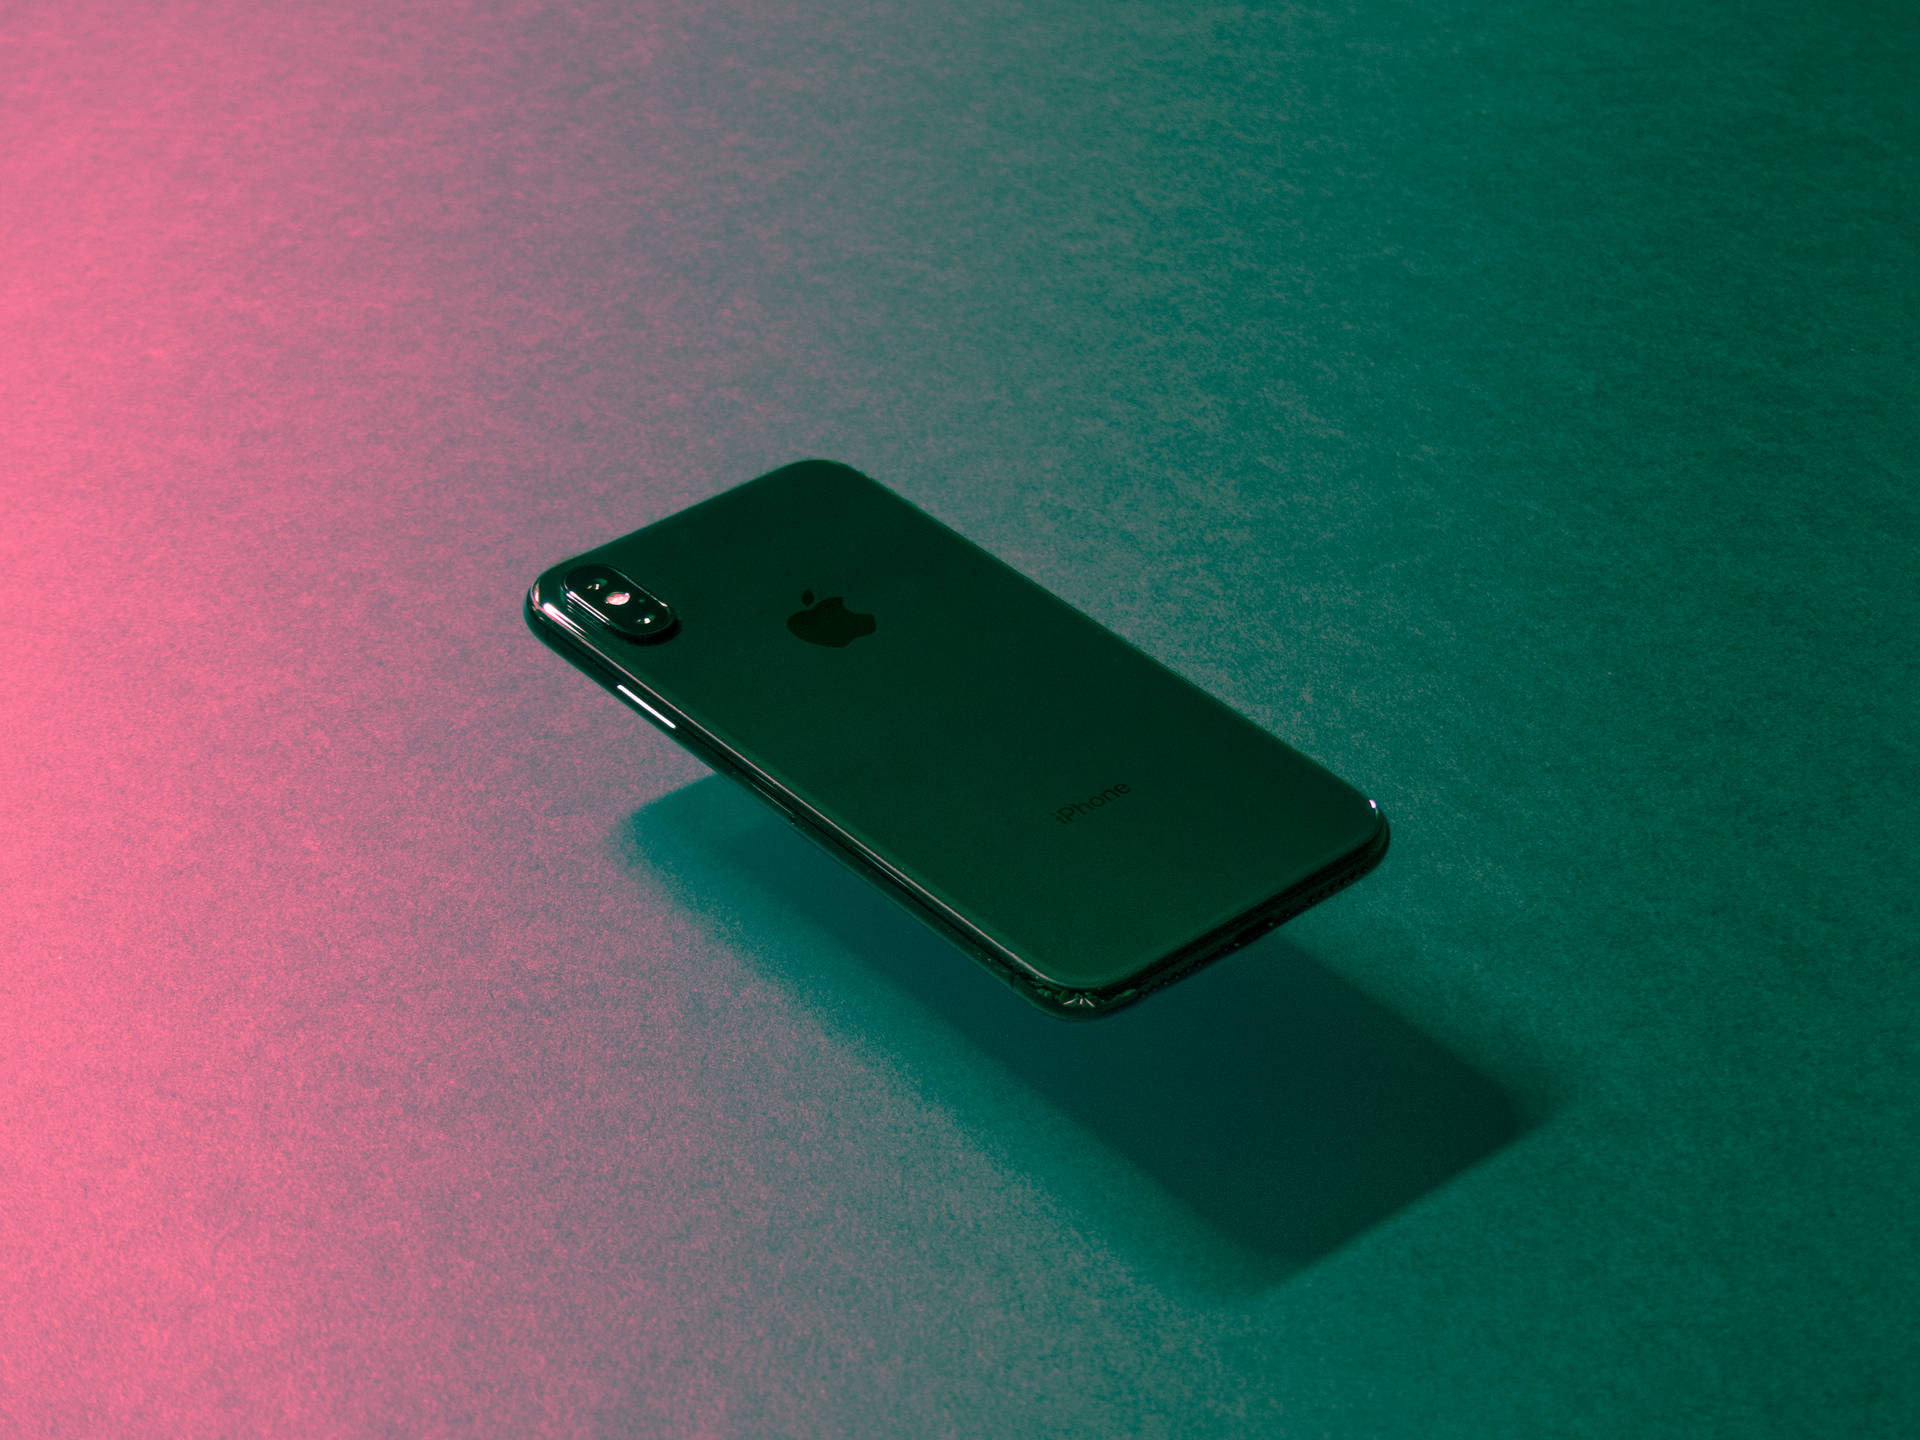 Sleek Iphone X With A Stunning Display Background